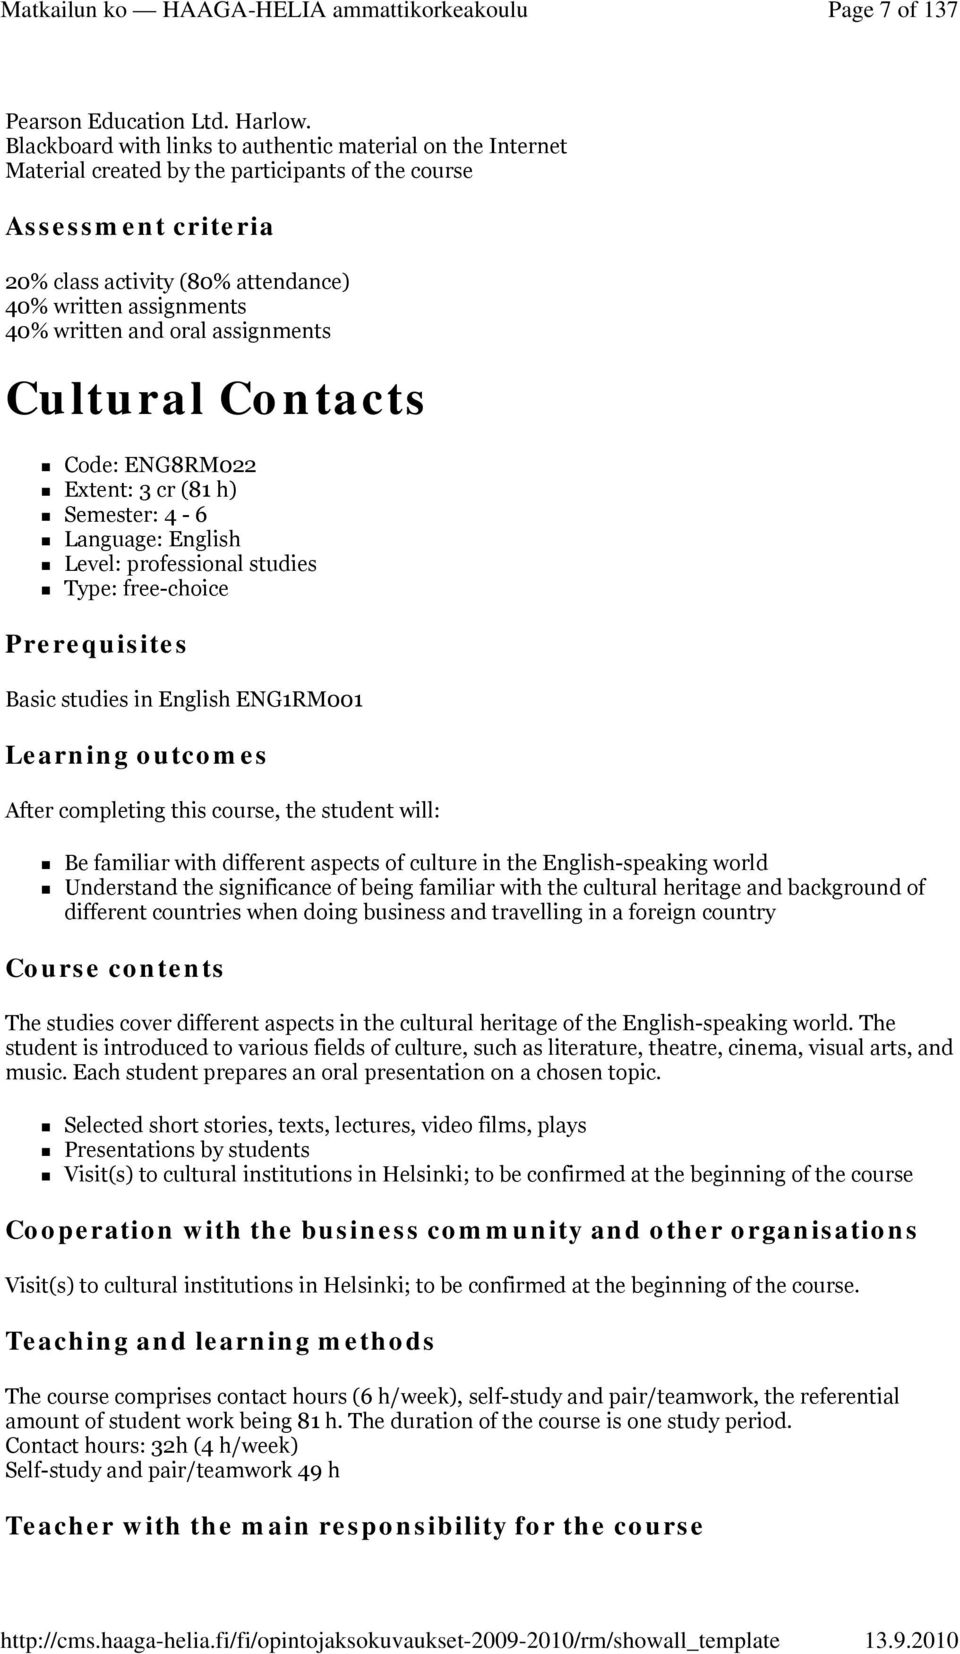 written and oral assignments Cultural Contacts Code: ENG8RM022 Extent: 3 cr (81 h) Semester: 4-6 Language: English Level: professional studies Type: free-choice Prerequisites Basic studies in English